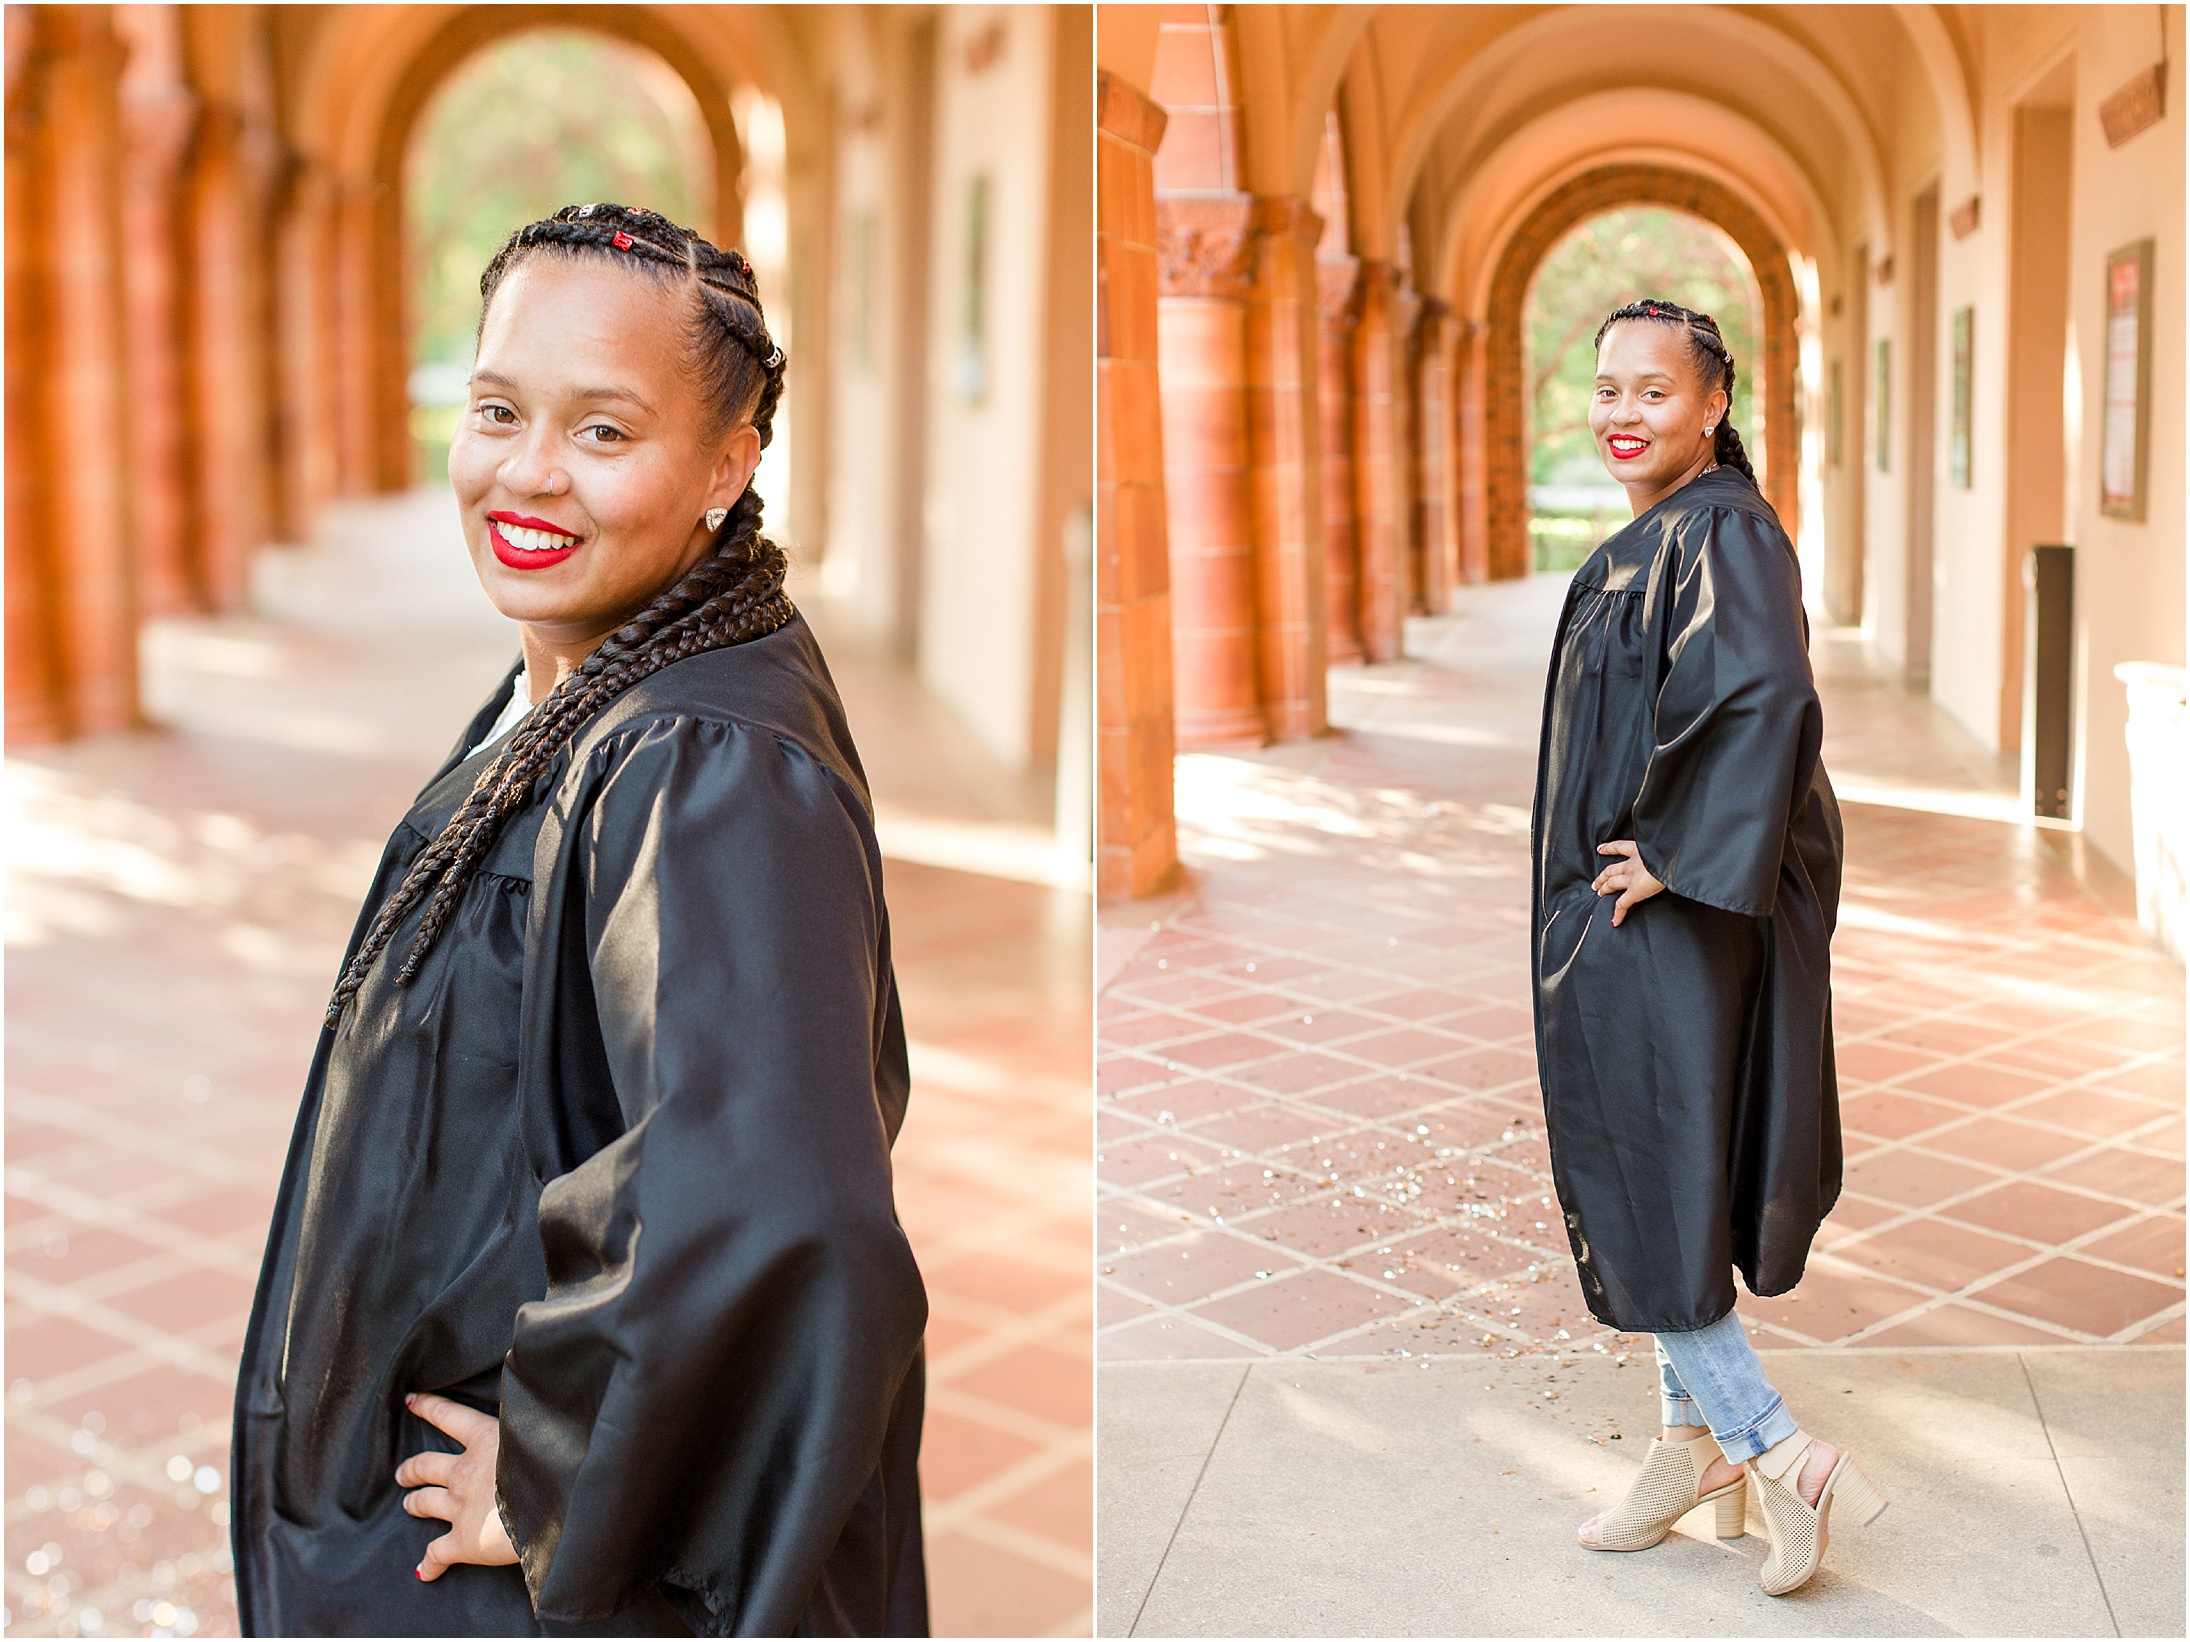 California State University Chico Senior Cap and Gown Kendal Hall,